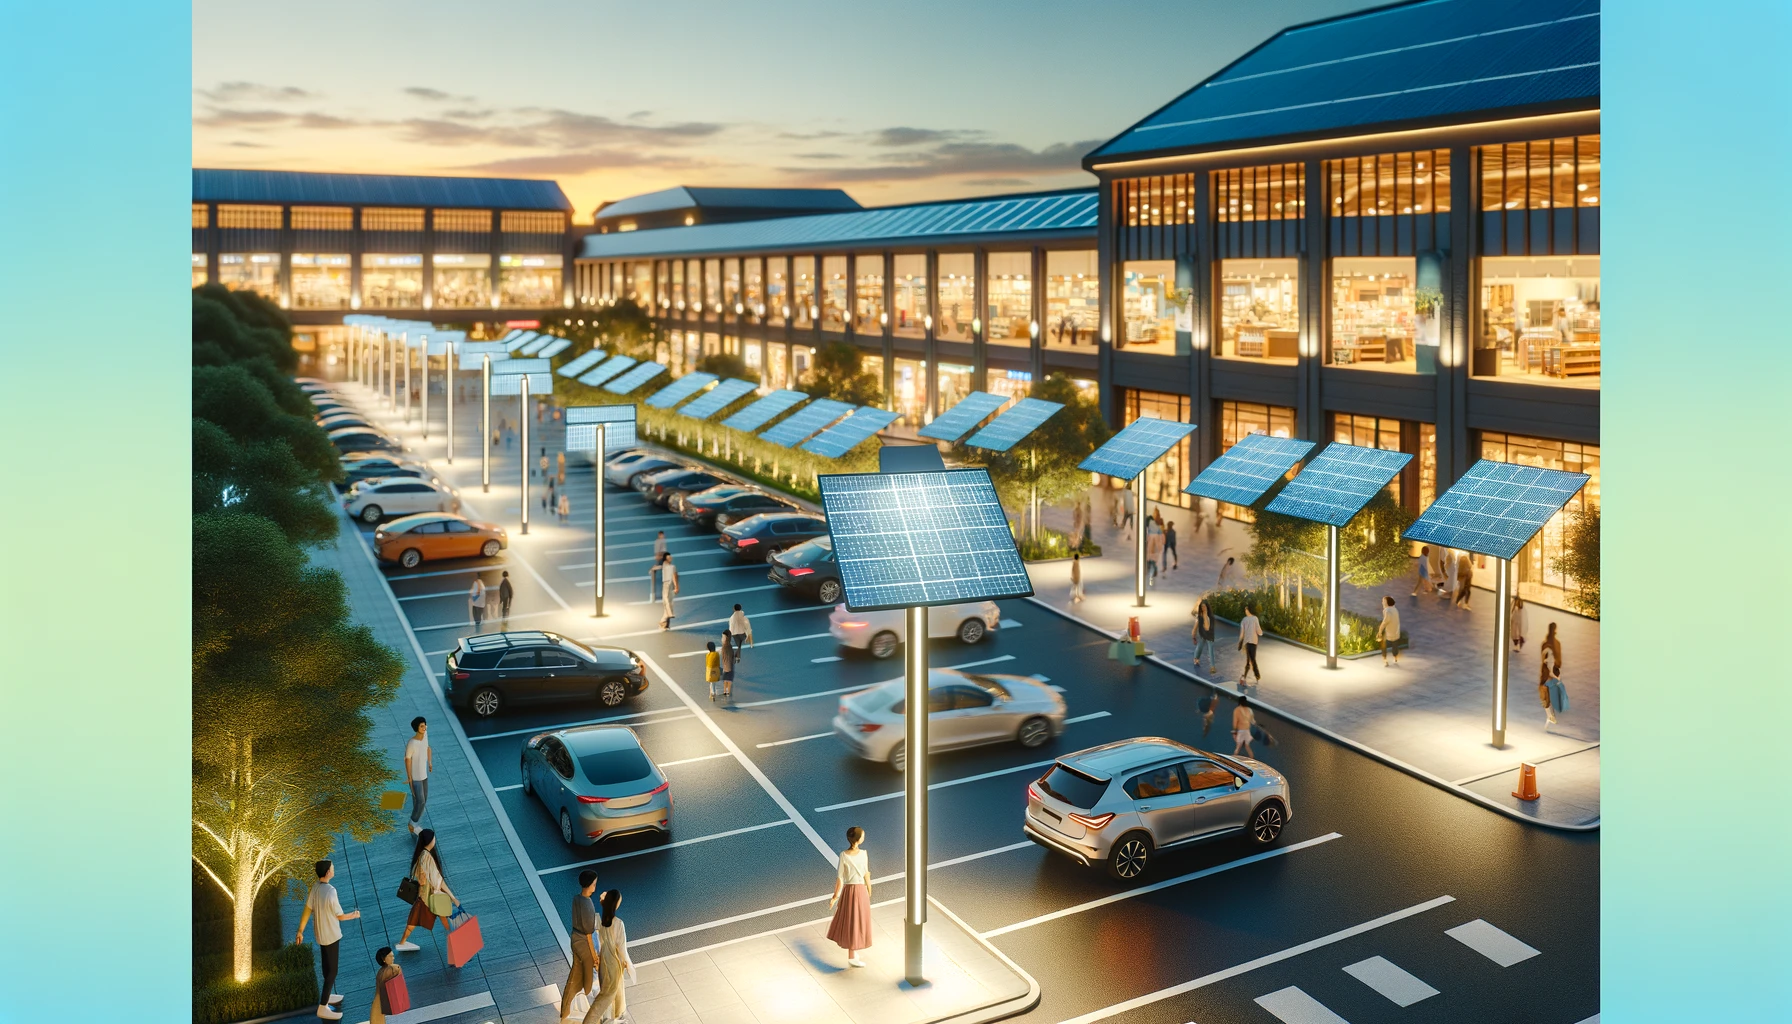 The Bright Future of Solar Powered LED Lighting Systems